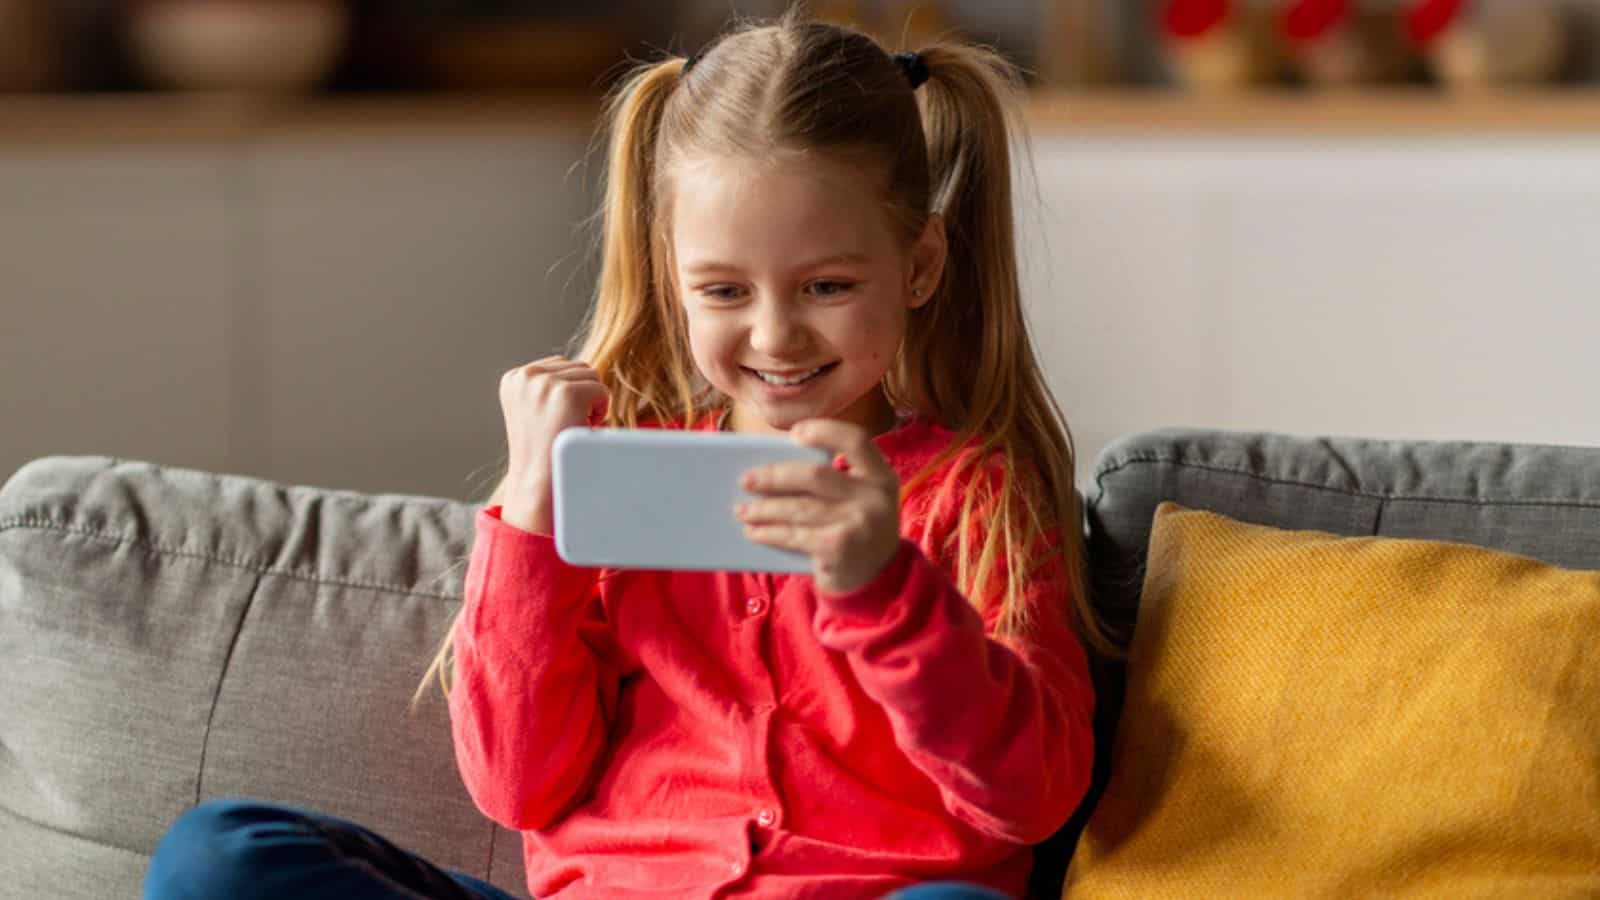 Cute Little Girl Playing Games On Smartphone At Home And Celebrating Success